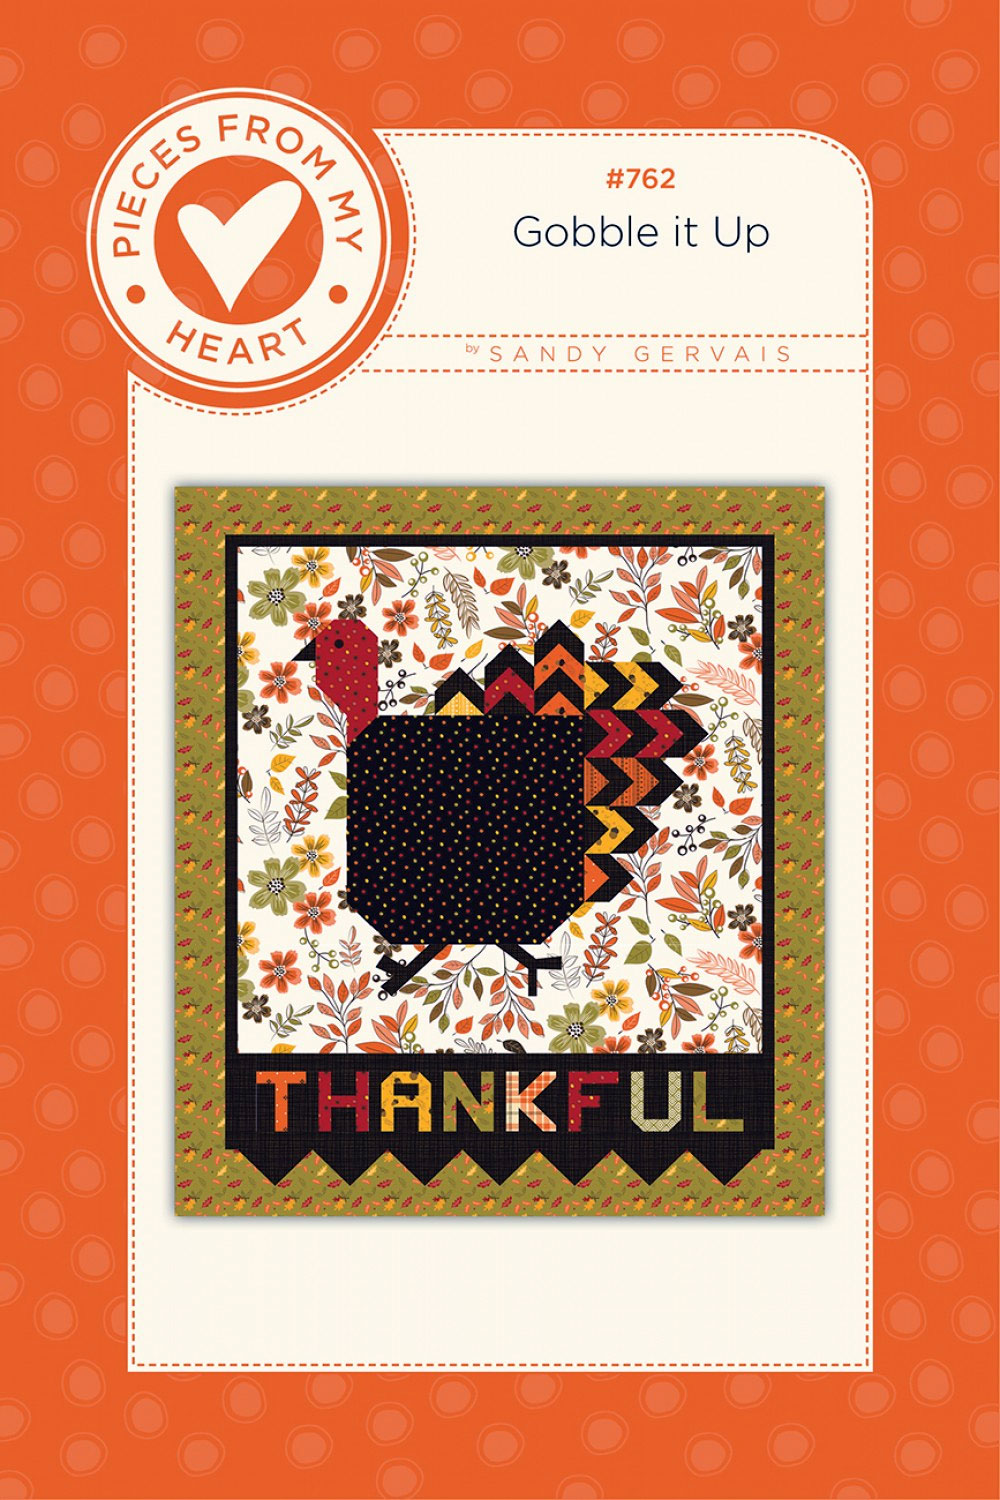 Gobble-It-Up-quilt-sewing-pattern-Pieces-From-My-Heart-front